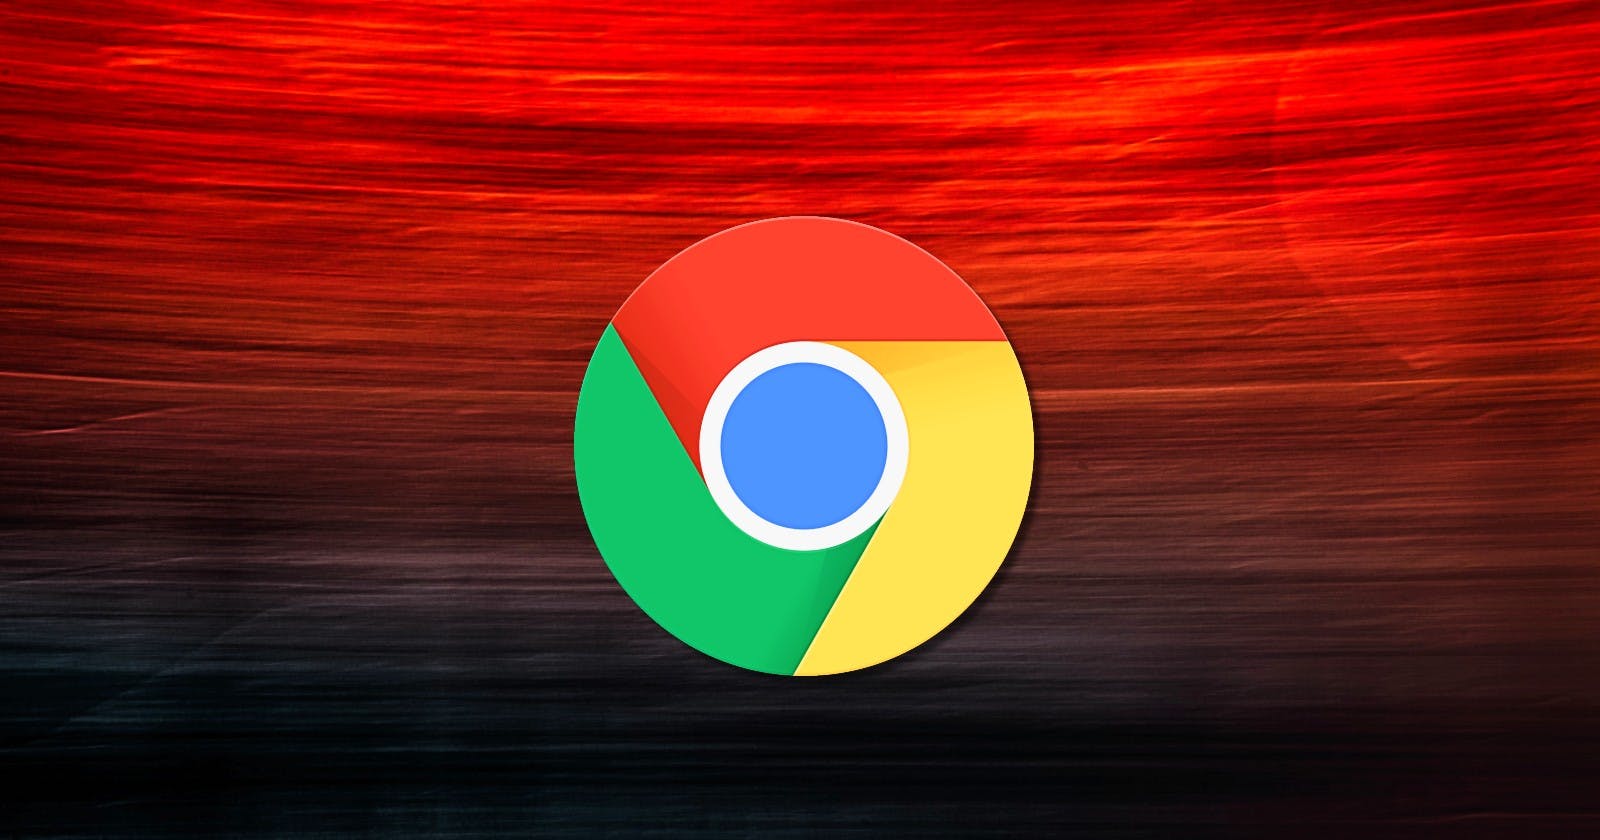 23 Vulnerabilities in Google Chrome Browser that Allows Remote Code Execution Patched